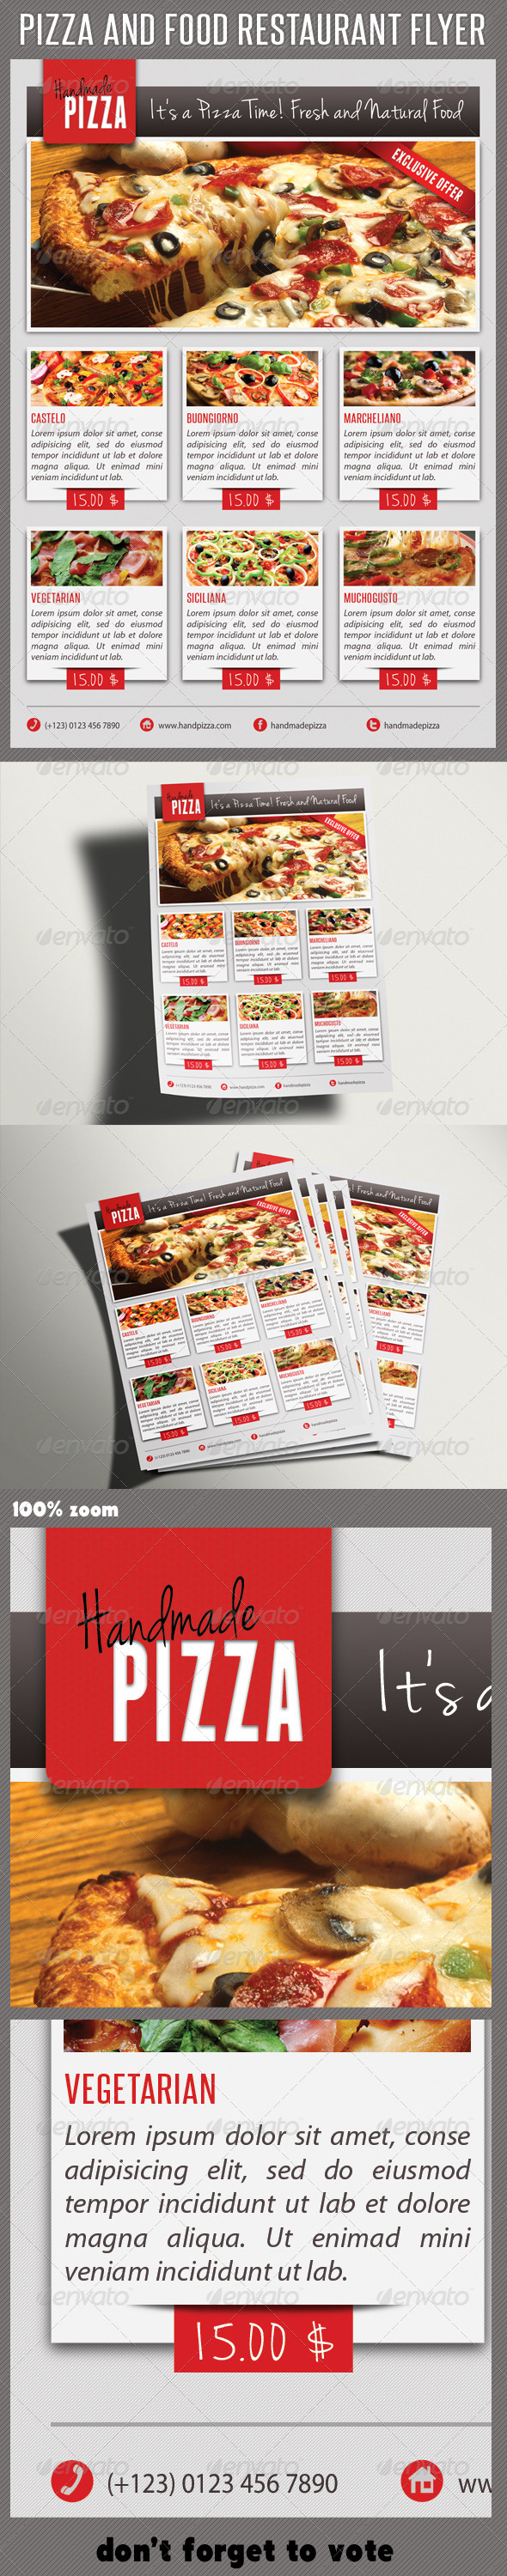 Food And Pizza Menu Flyer 04